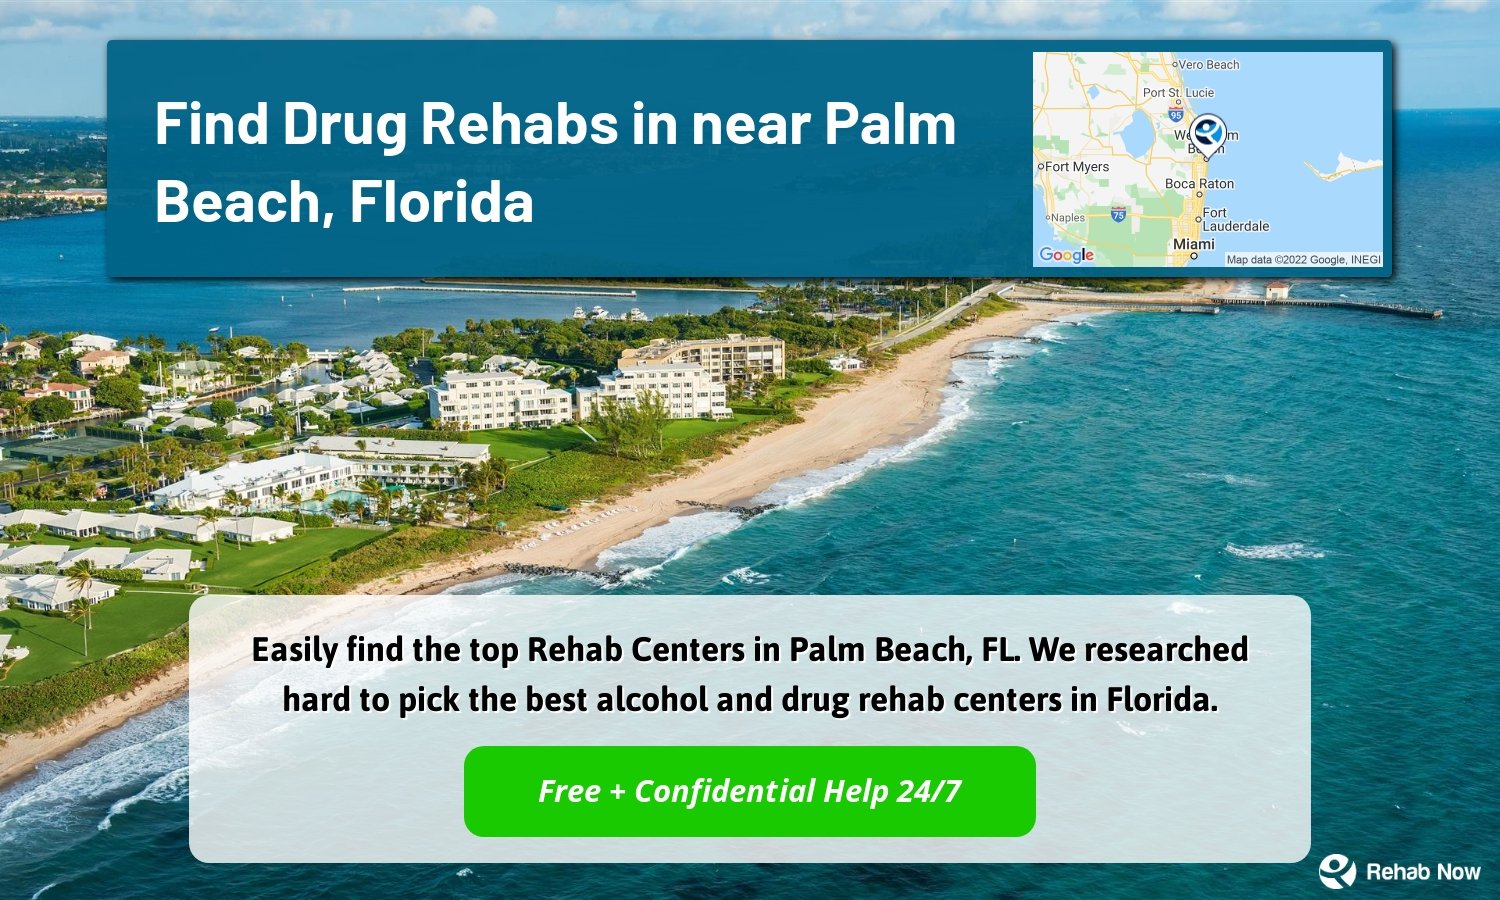 Easily find the top Rehab Centers in Palm Beach, FL. We researched hard to pick the best alcohol and drug rehab centers in Florida.